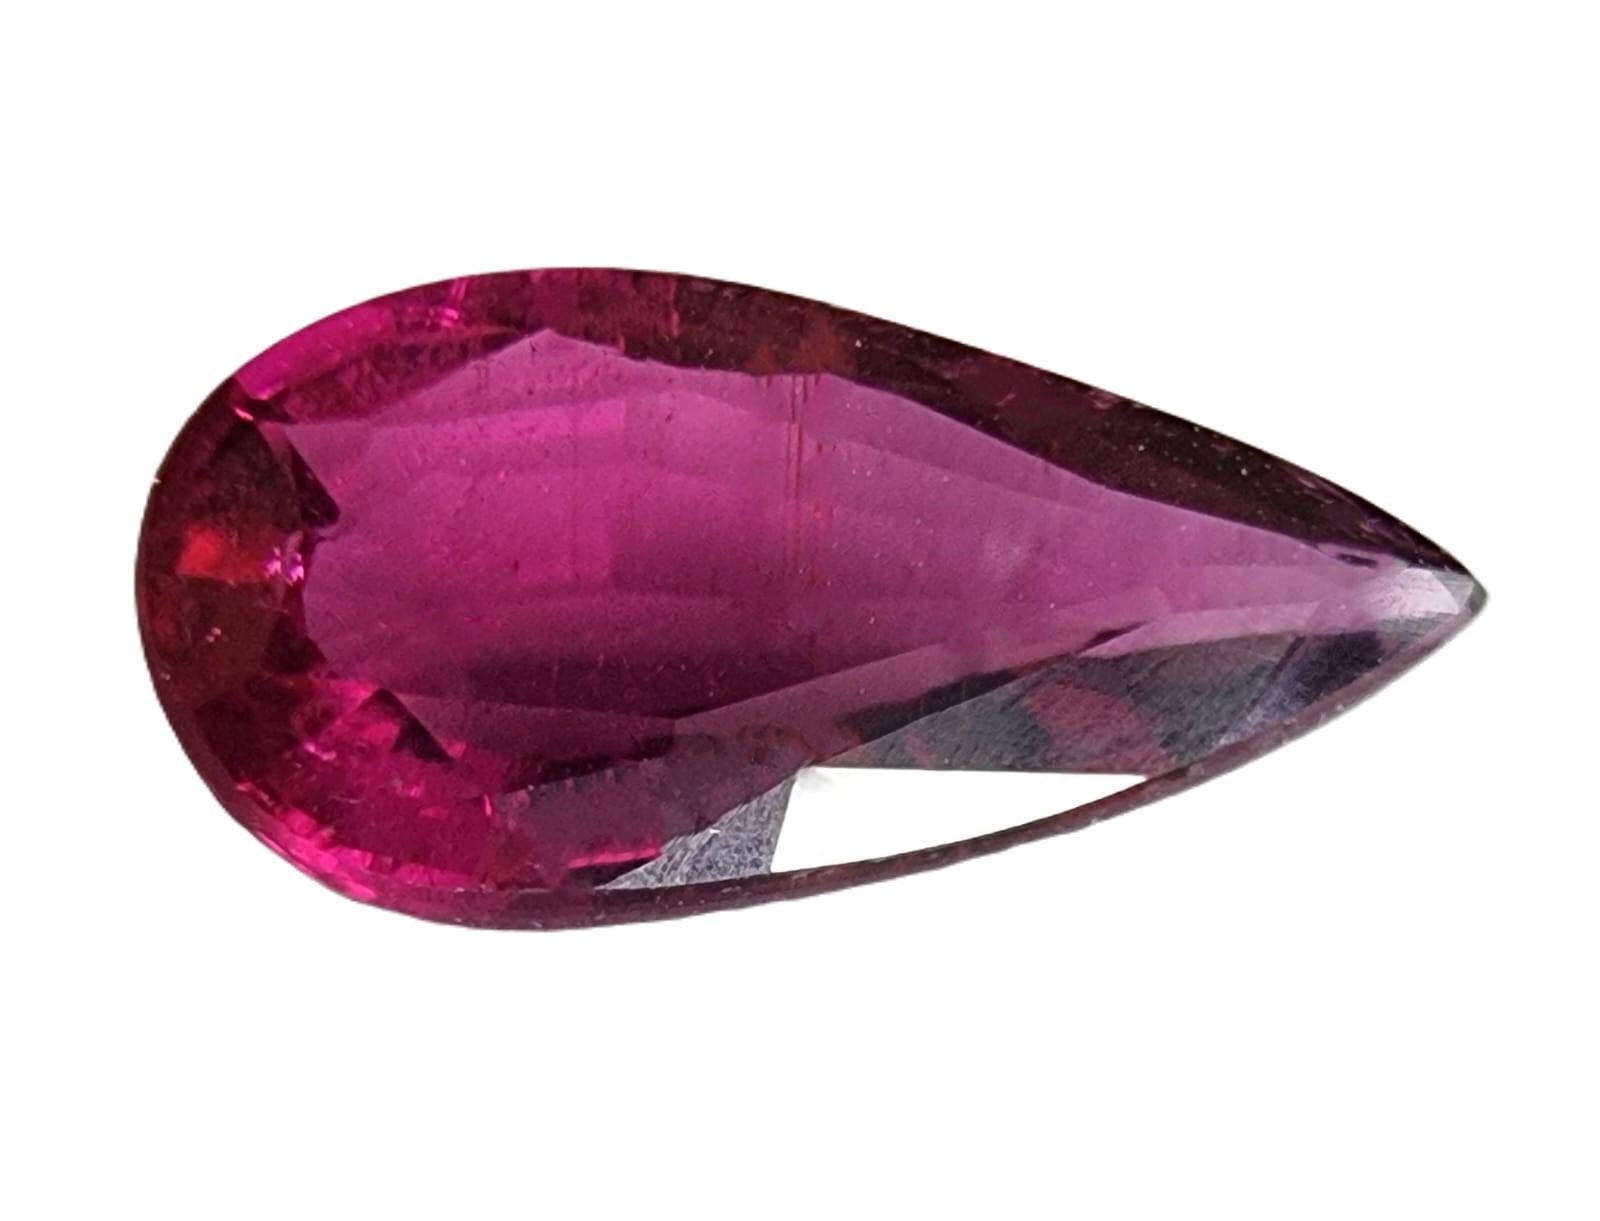 Elevate your jewelry creations  or gemstone collection with the enchanting beauty of this 2.95ct Pear Cut Pinkish Red Rubellite Tourmaline. This gemstone showcases a pinkish-red hue that exudes warmth and charm. The pear cut, with its timeless